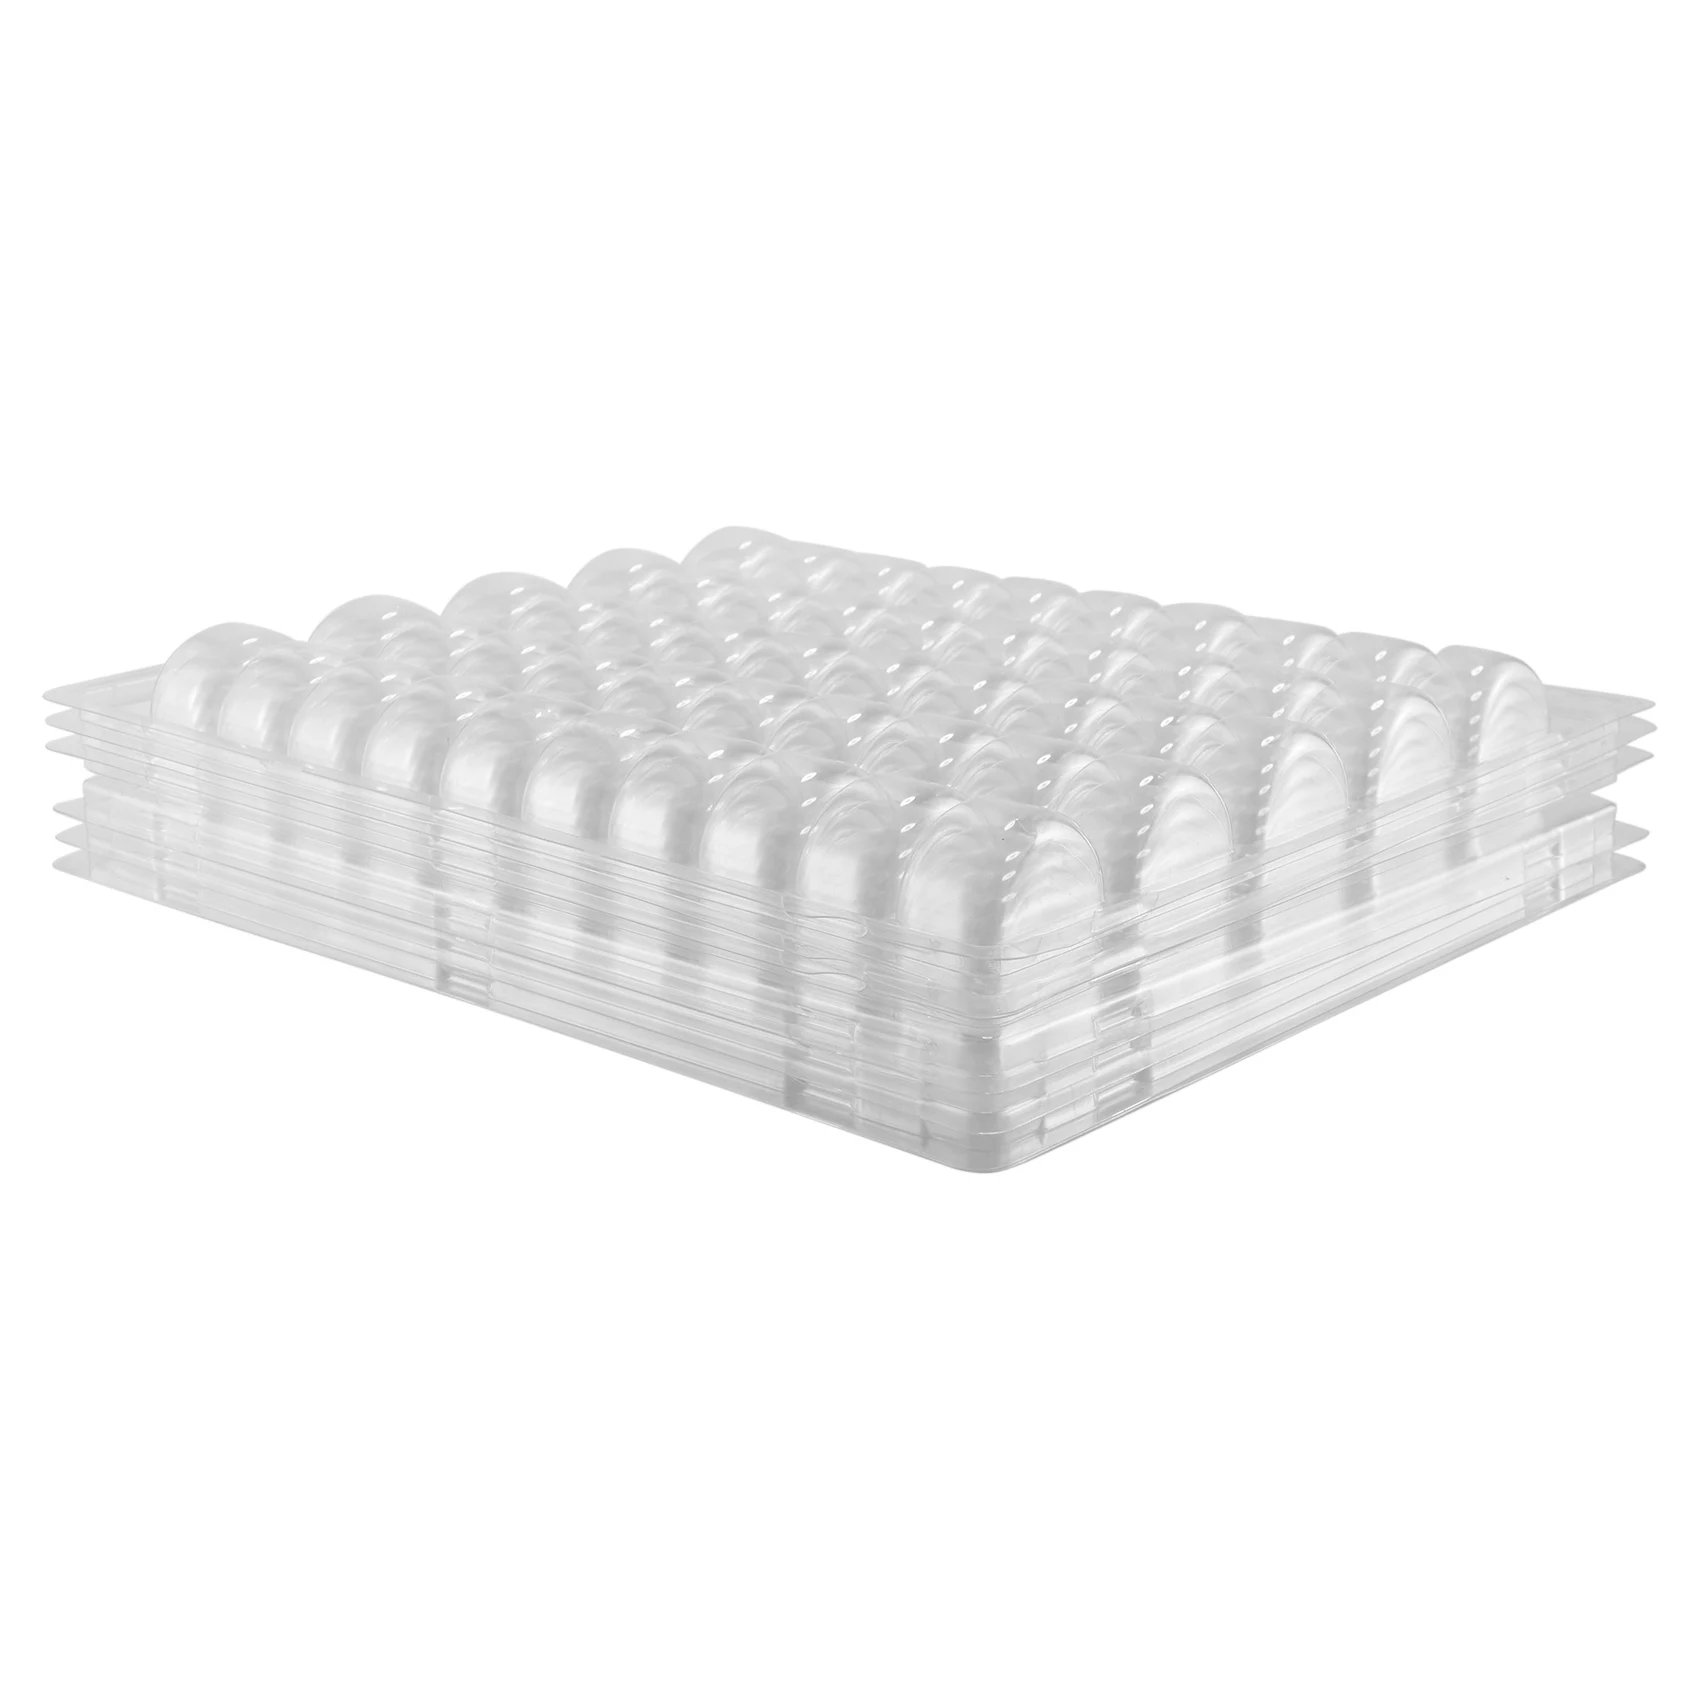 

Clear PET Closeable French Macaron Storage Trays - Holds 50 Macarons Per Set - Pack of 4Sets